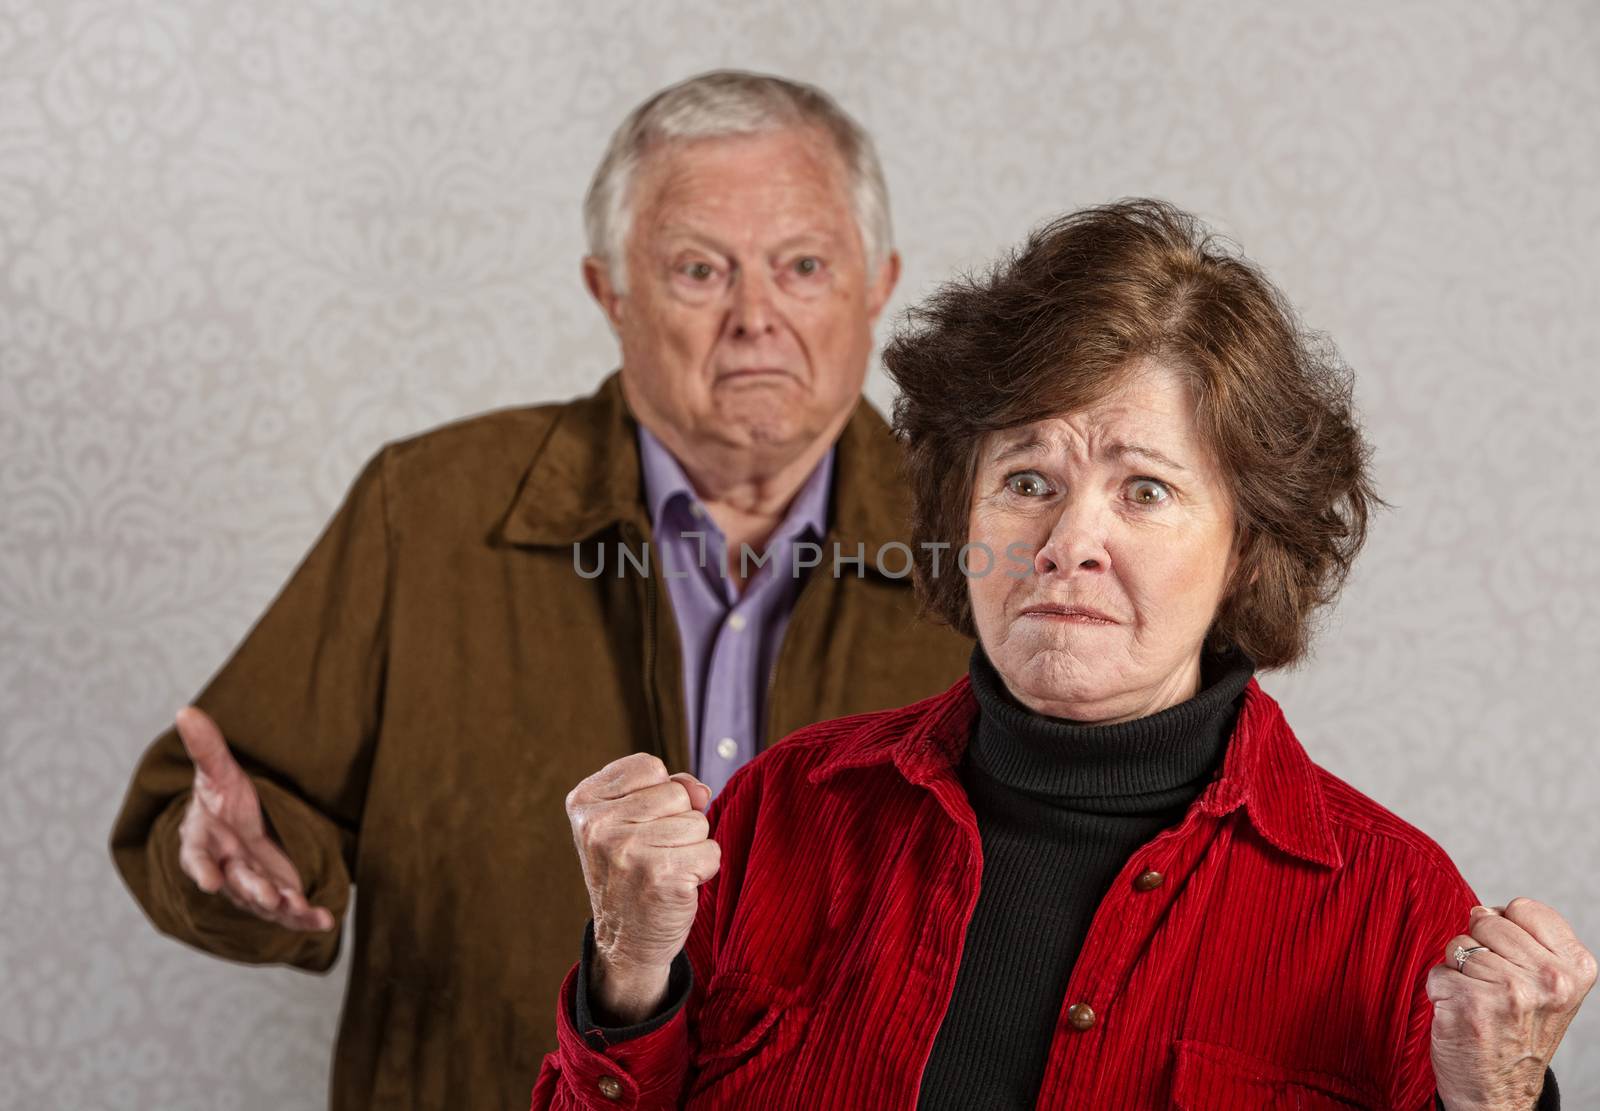 Offended mature wife near frustrated husband with hands up